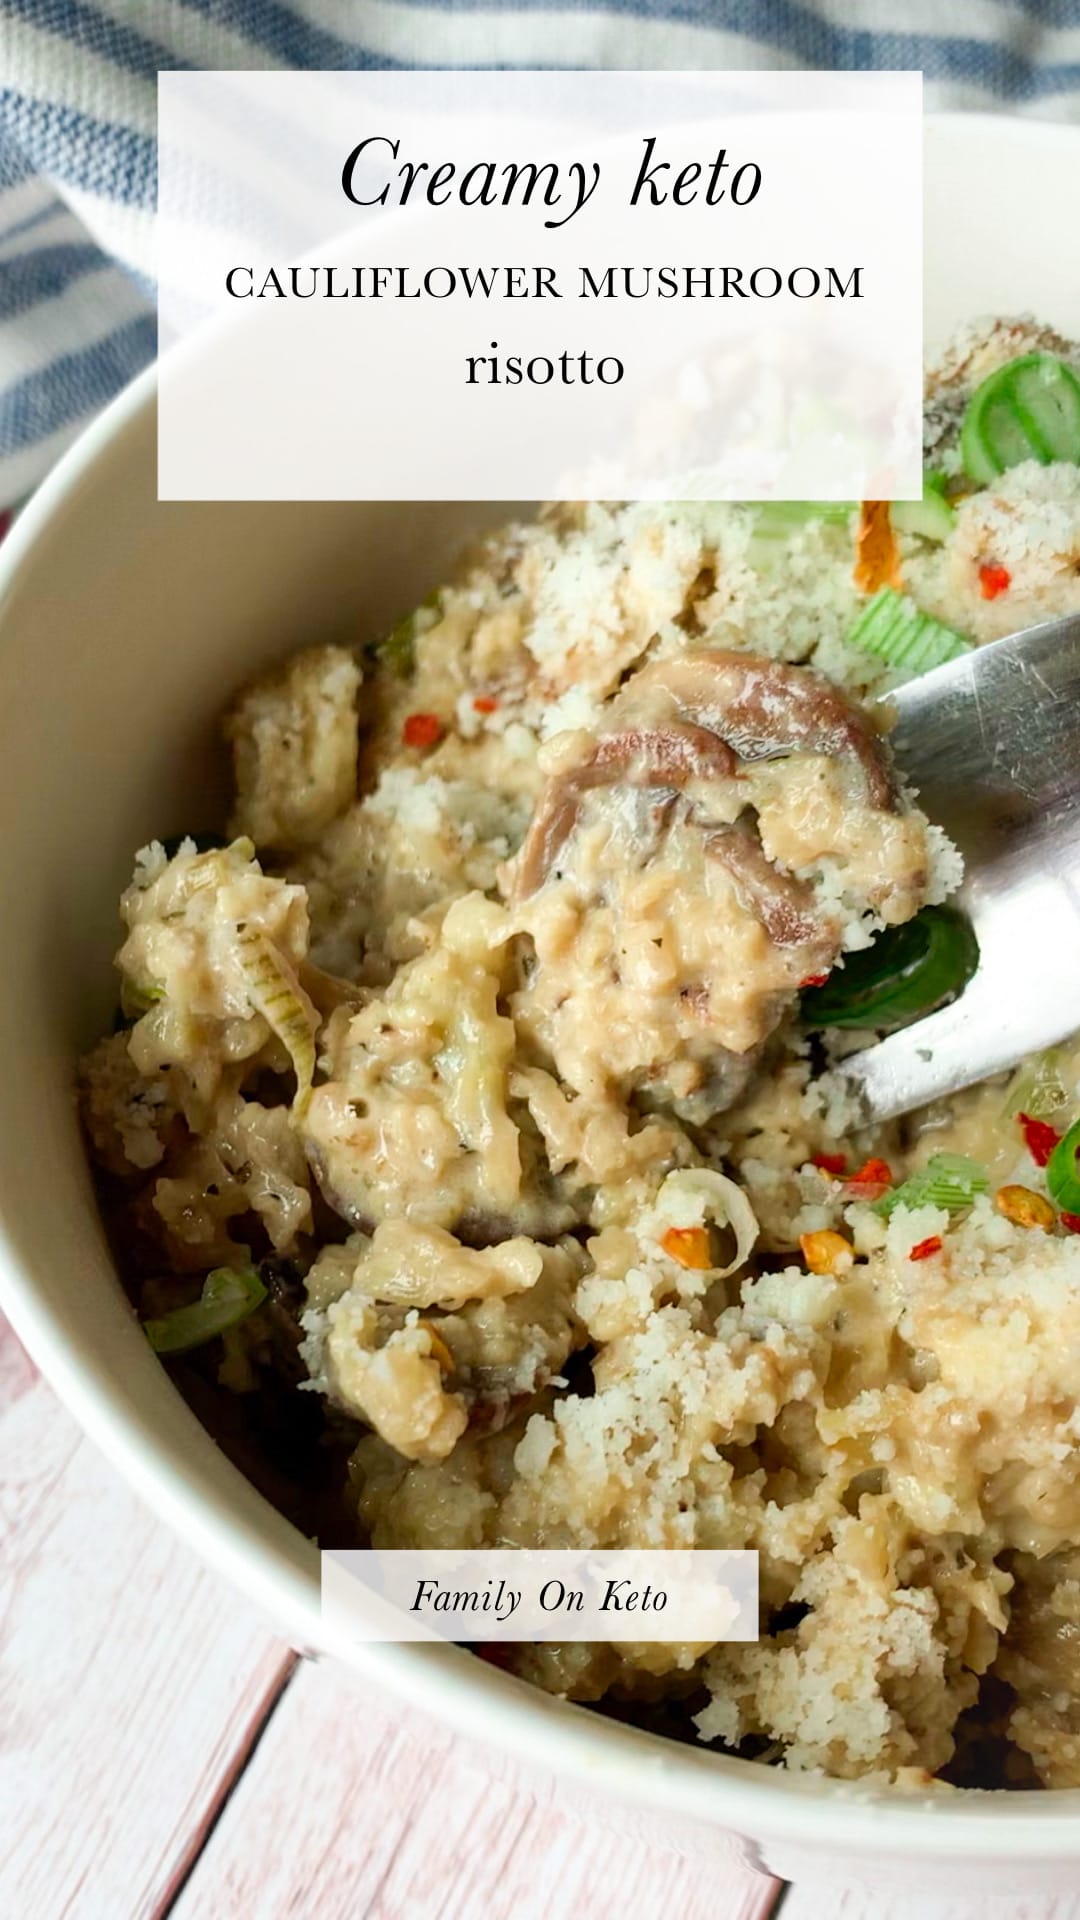 Photo of creamy keto cauliflower risotto with mushrooms and cheese